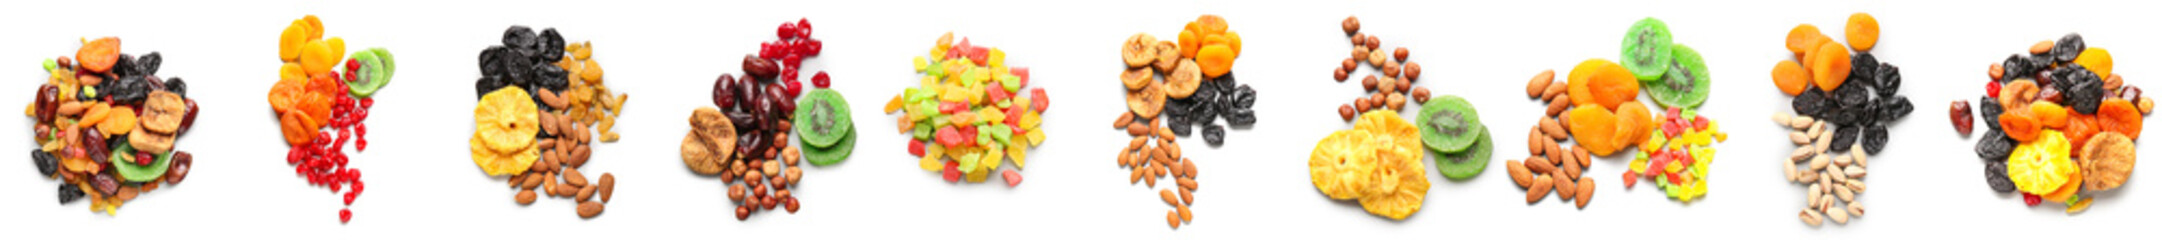 Collage of different dried fruits and nuts on white background